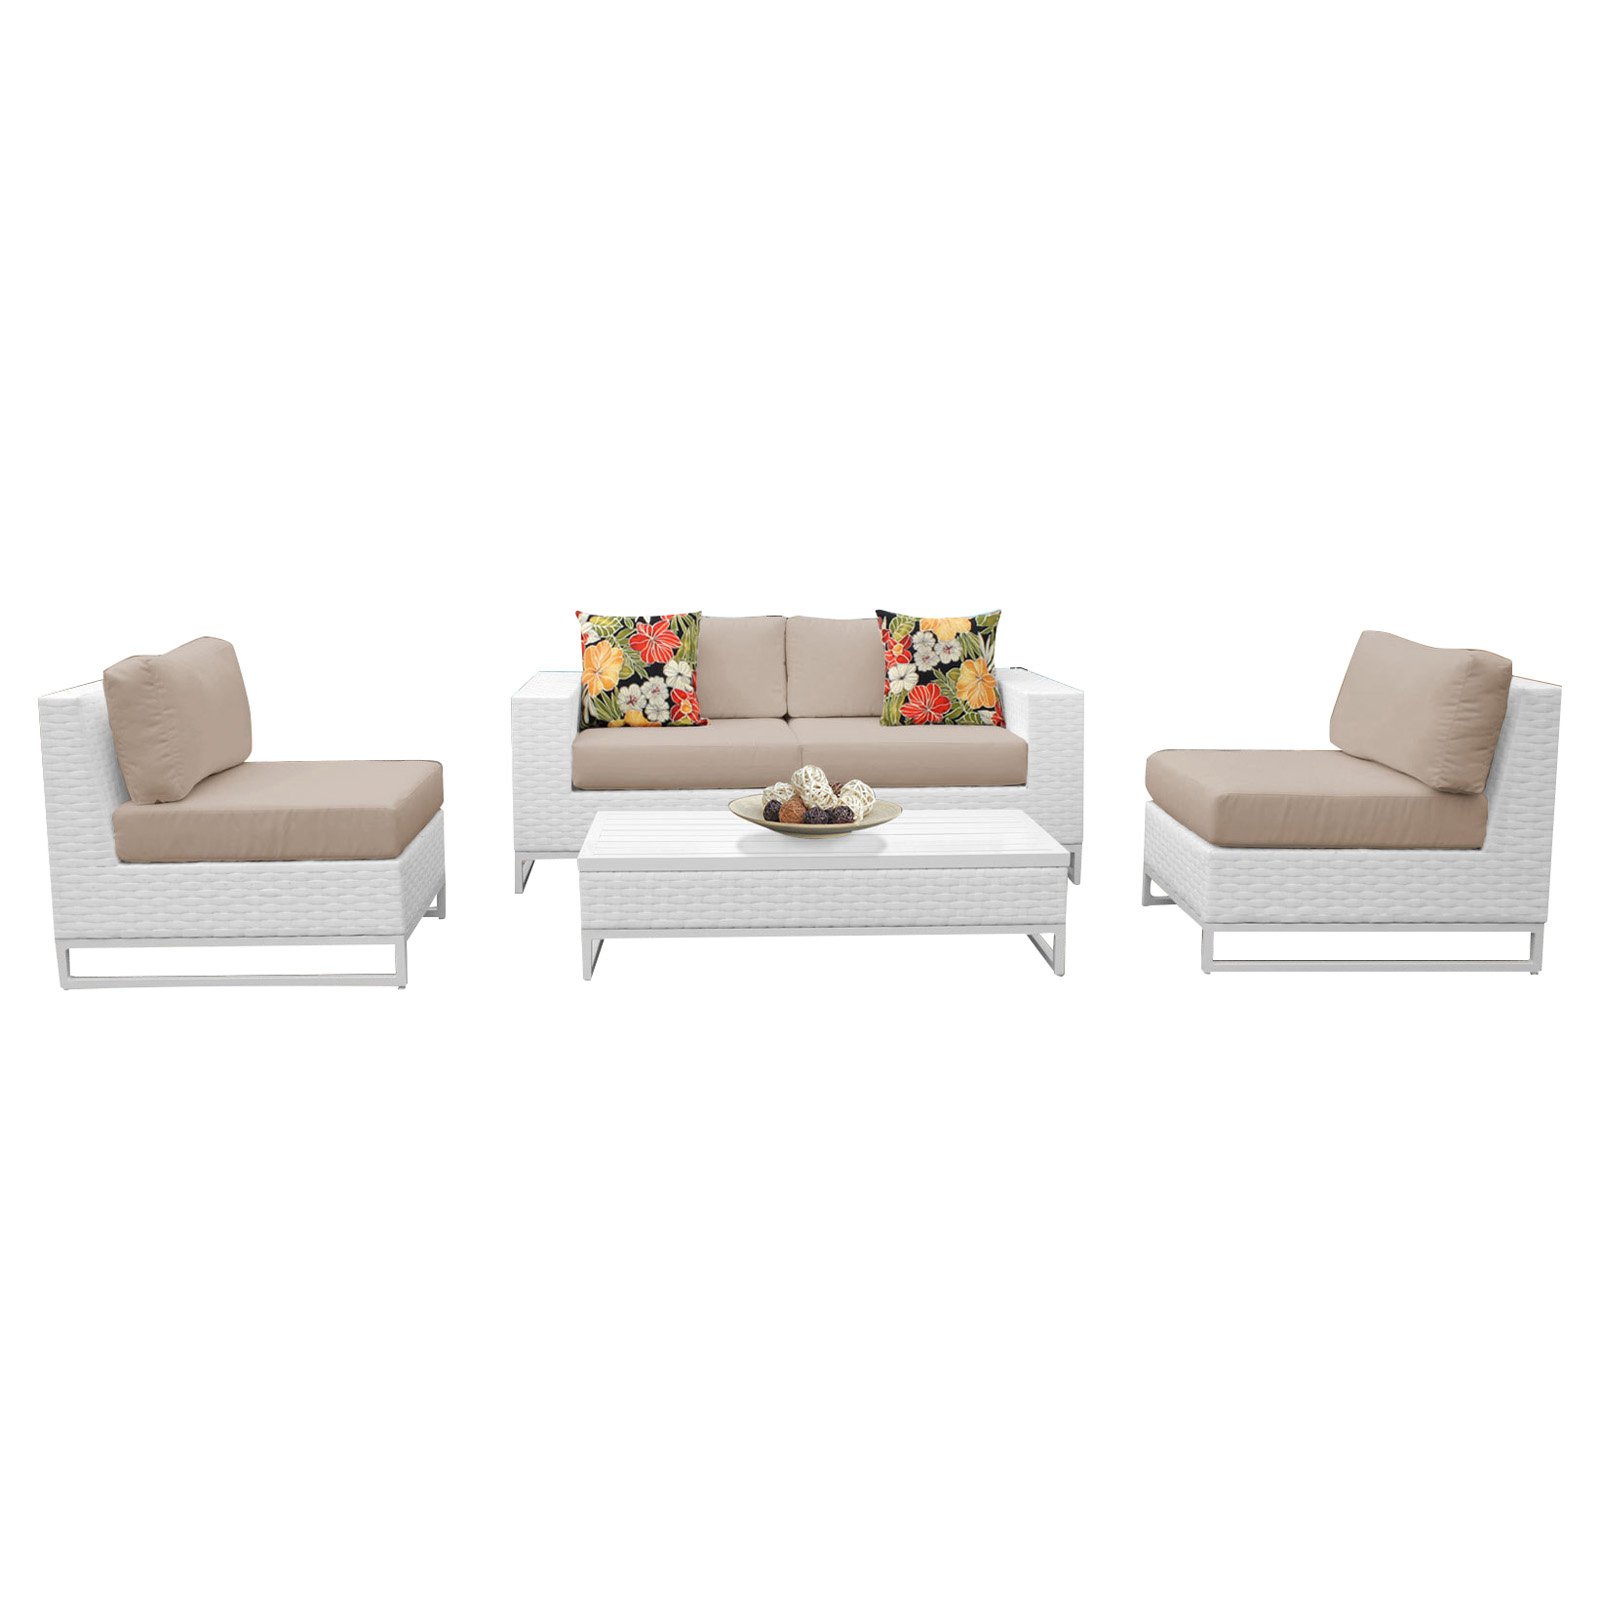 TK Classics Miami Wicker 5 Piece Patio Conversation Set with Armless Chairs - image 1 of 3